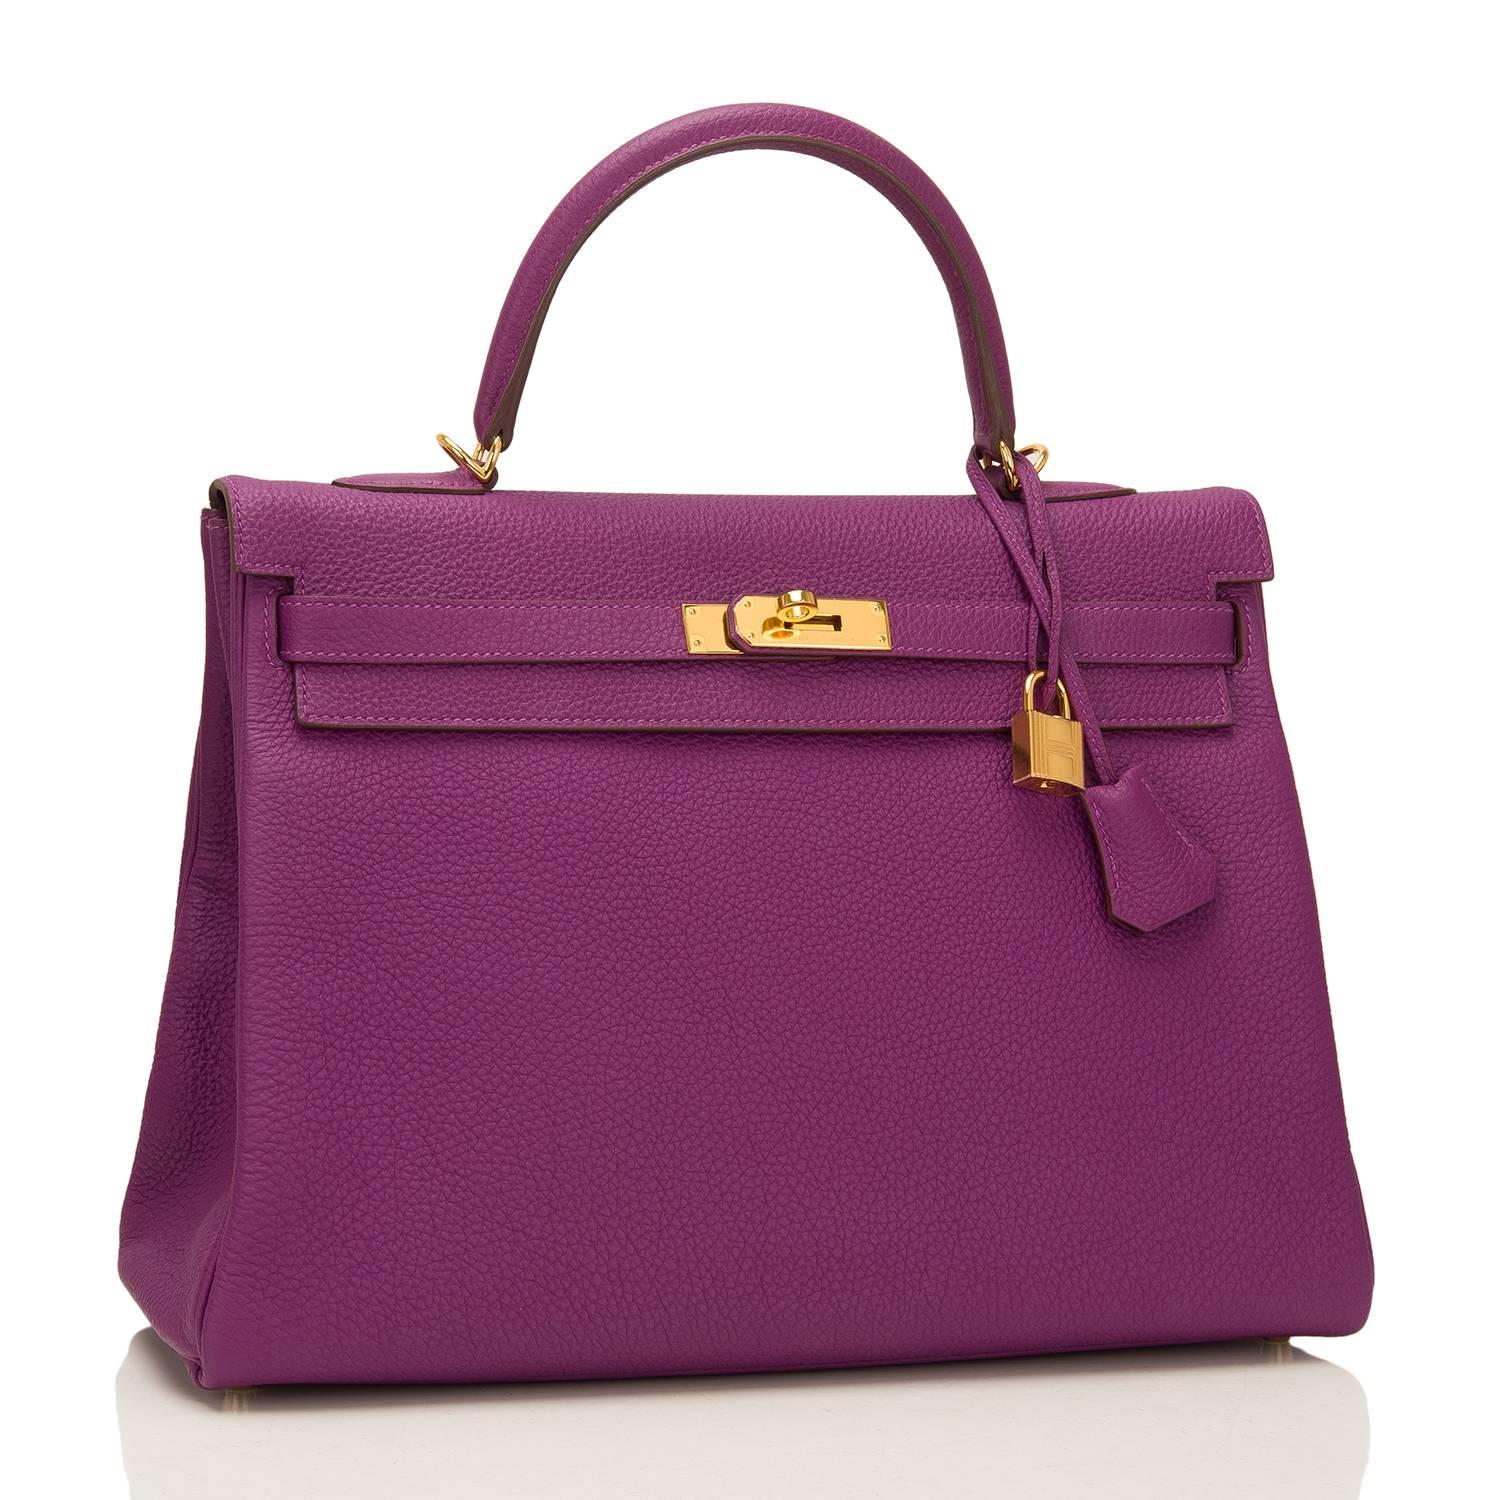 Hermes Kelly 35cm in Anemone togo leather with gold hardware.

This bag in the Retourne style has tonal stitching, a front toggle closure, a clochette with lock and two keys, a single rolled handle and an optional shoulder strap.

The interior is